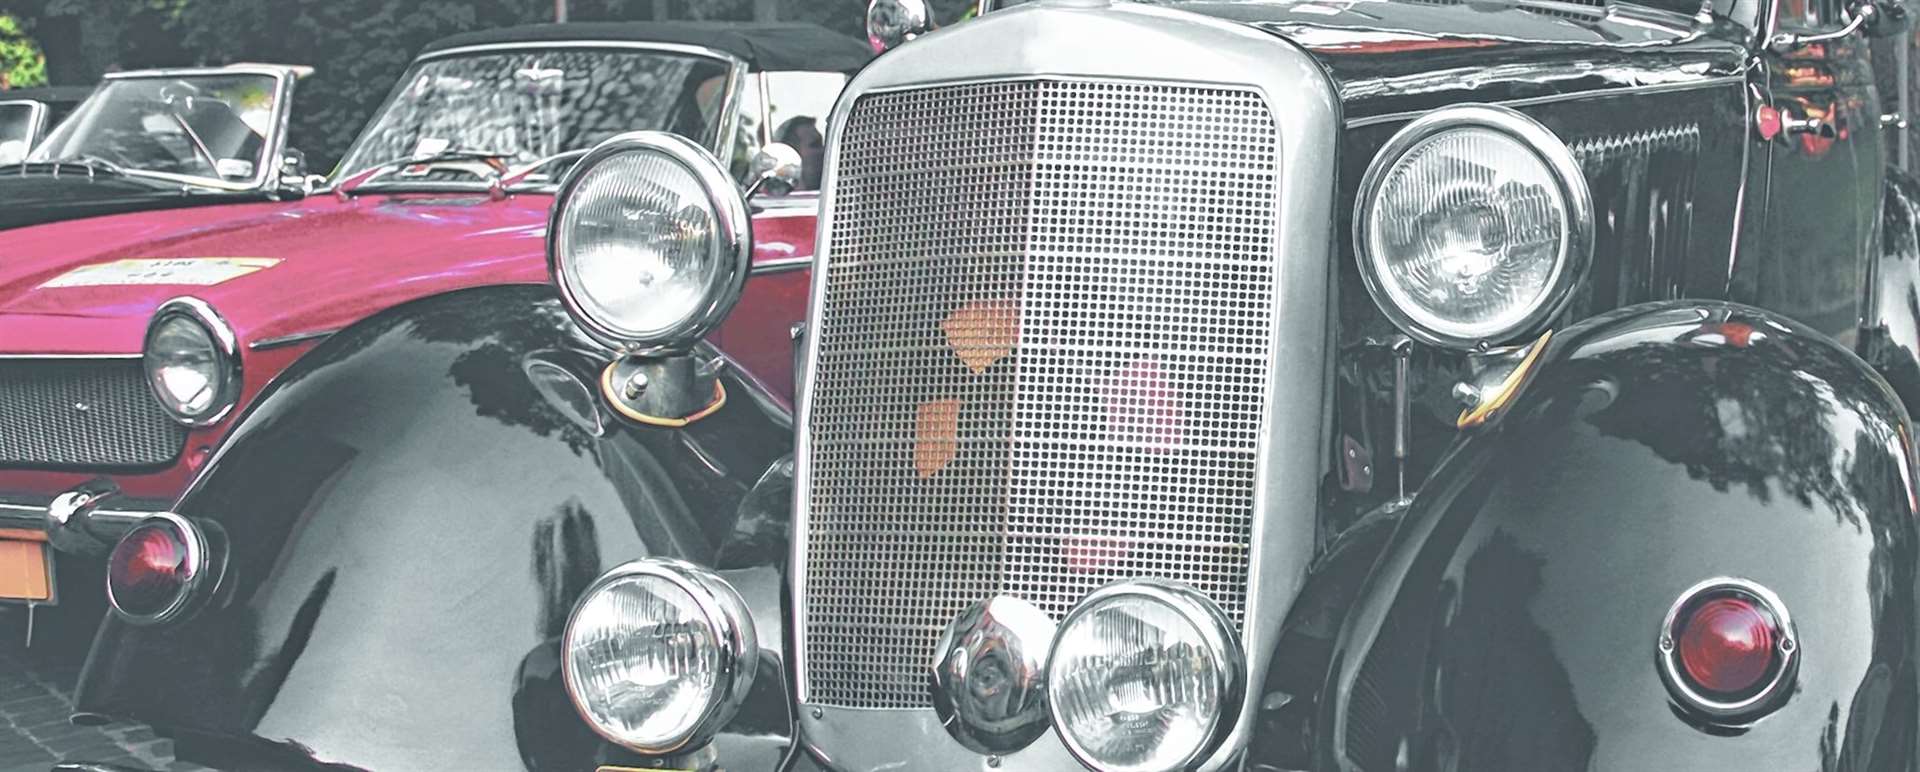 Inverness BID Classic Vehicle Show is on May 11.